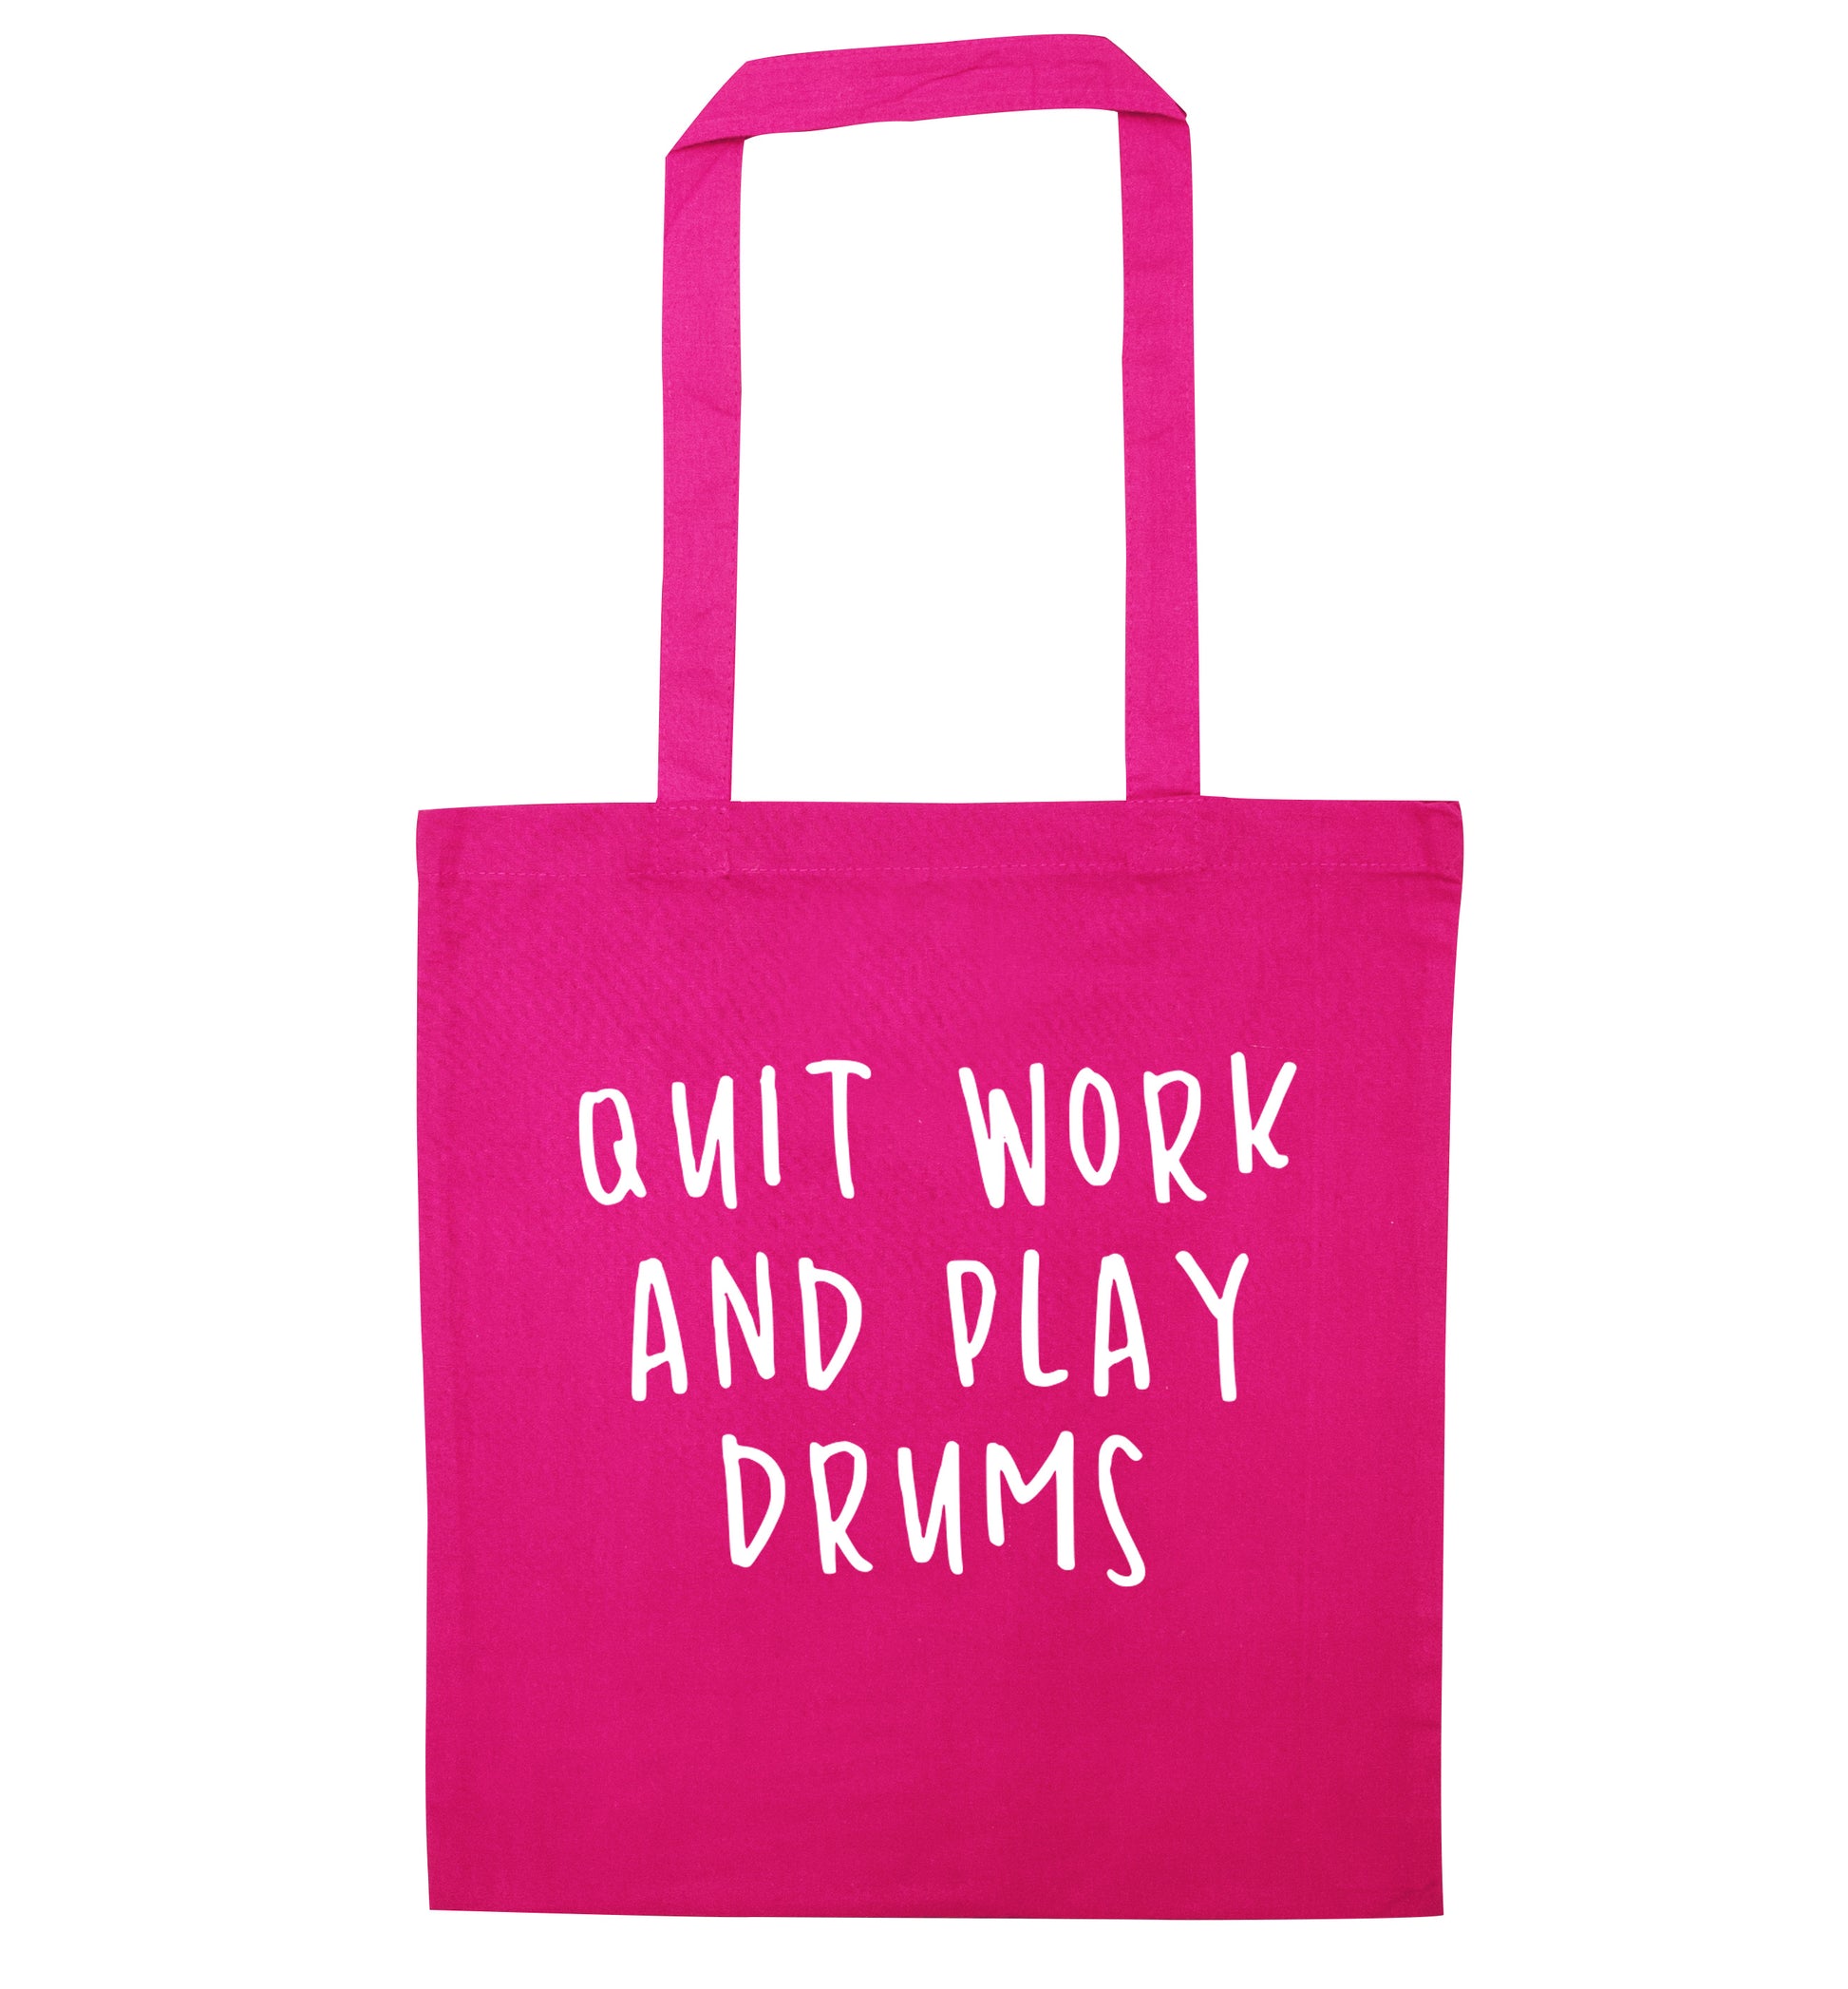 Quit work and play drums pink tote bag